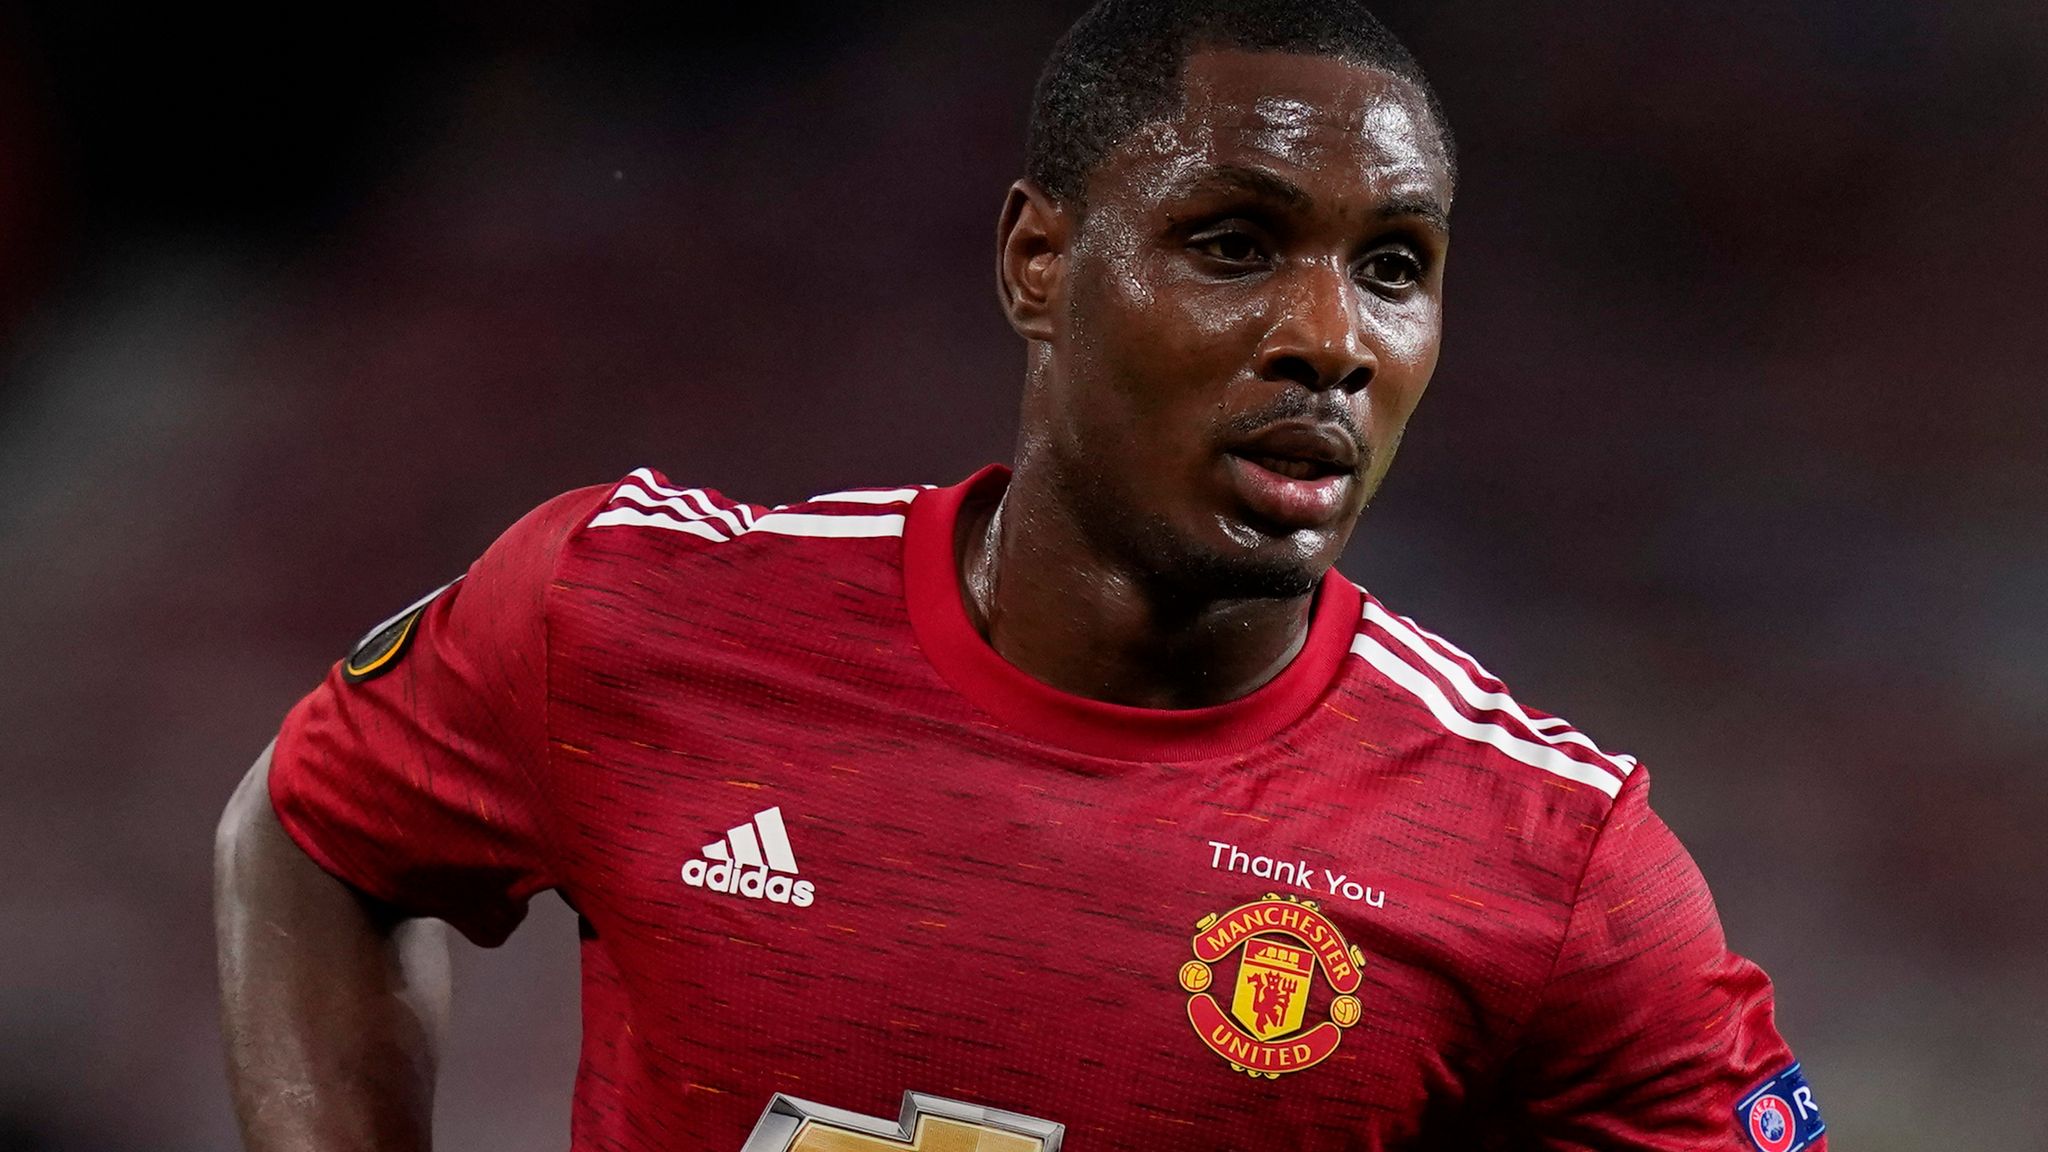 Odion Ighalo: Newcastle include former Man Utd and Watford striker on list of potential targets | Football News | Sky Sports